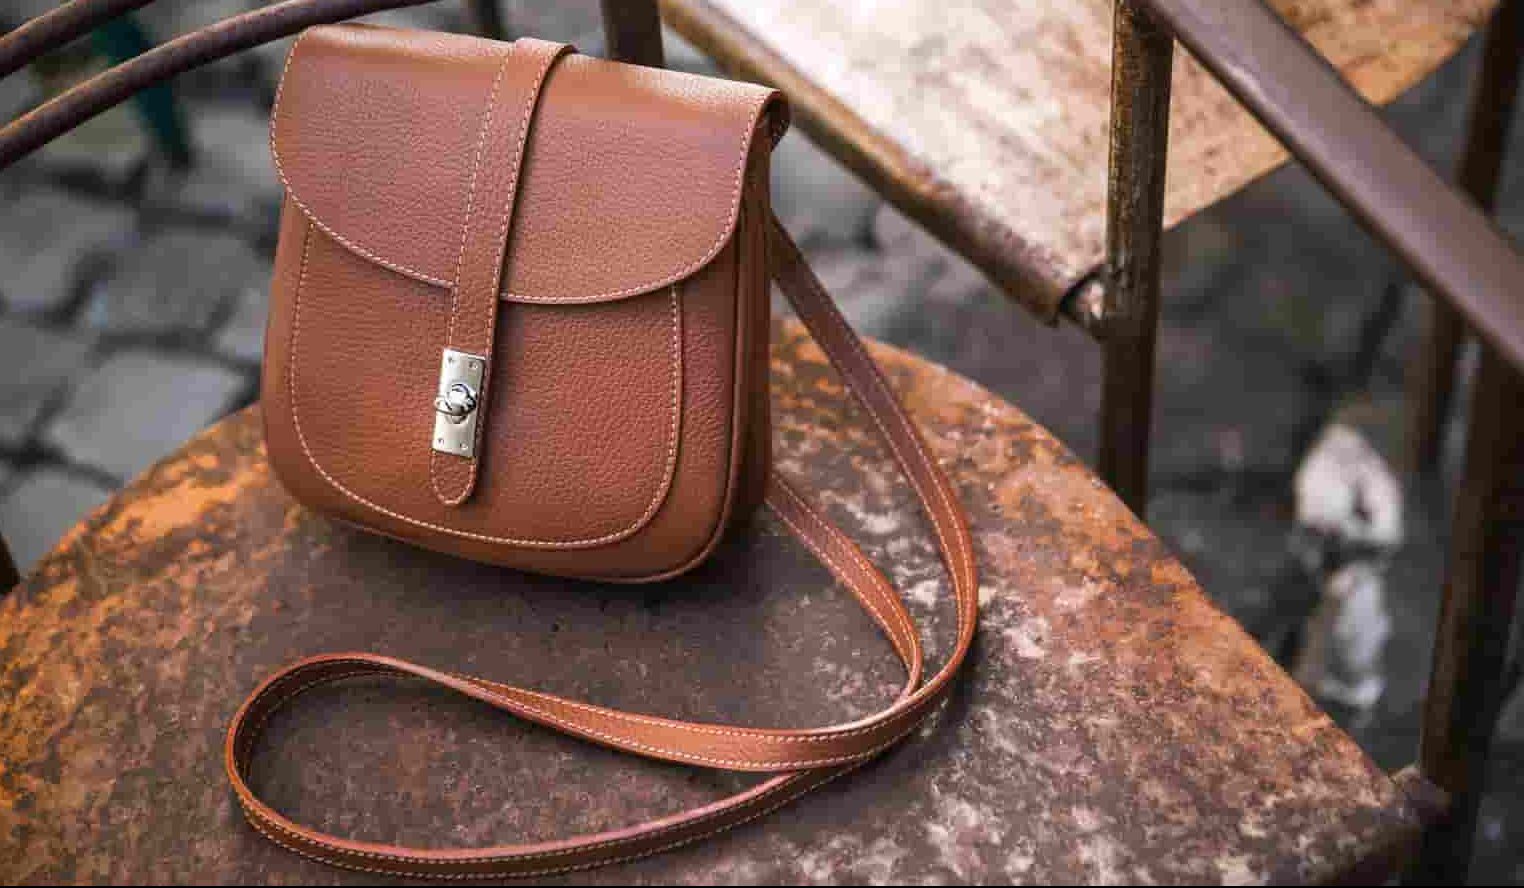 Buying pouch leather bag 